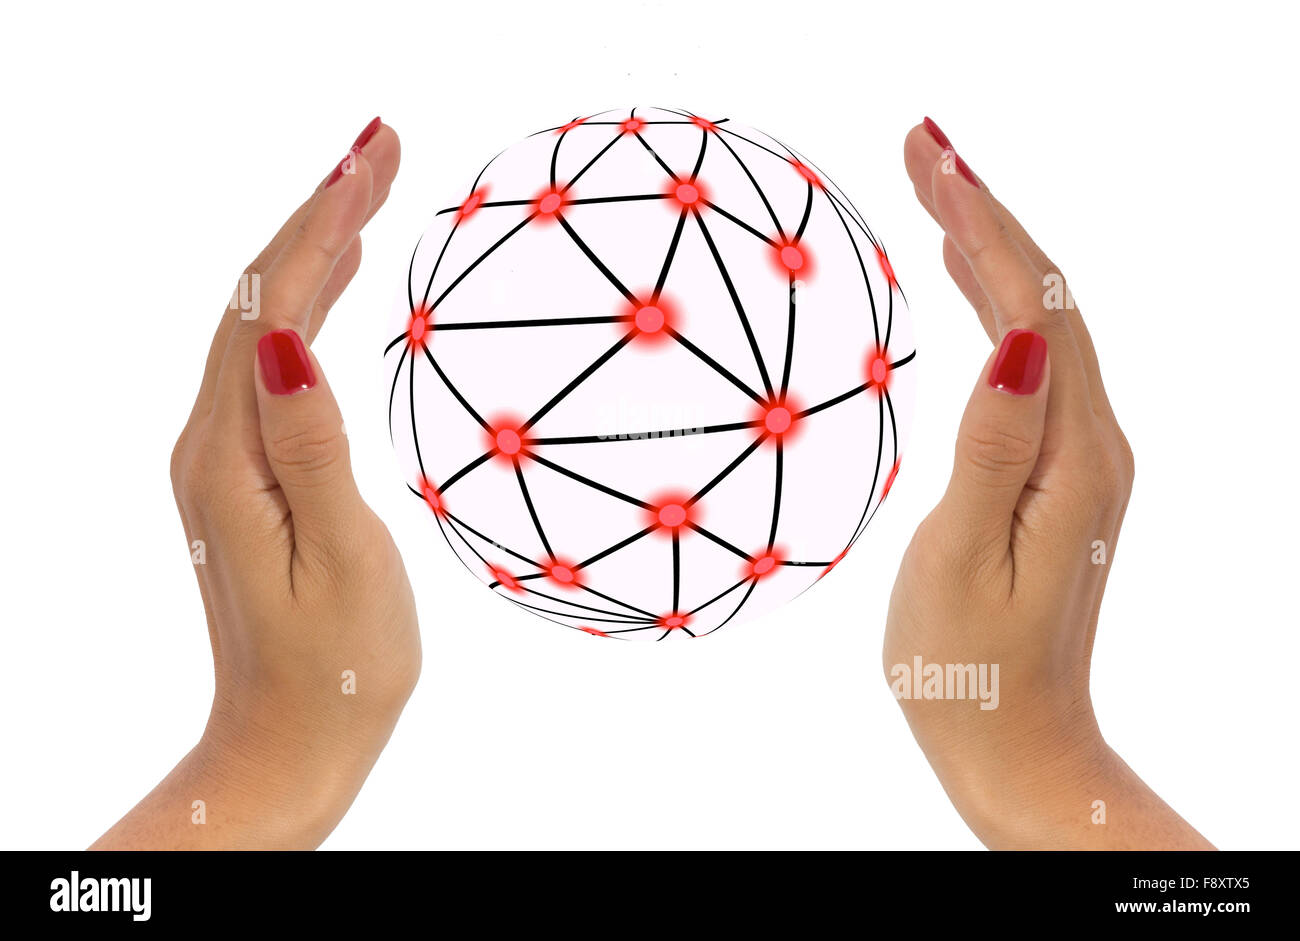 Protect network concept with two hands enclosing a digital ball Stock Photo